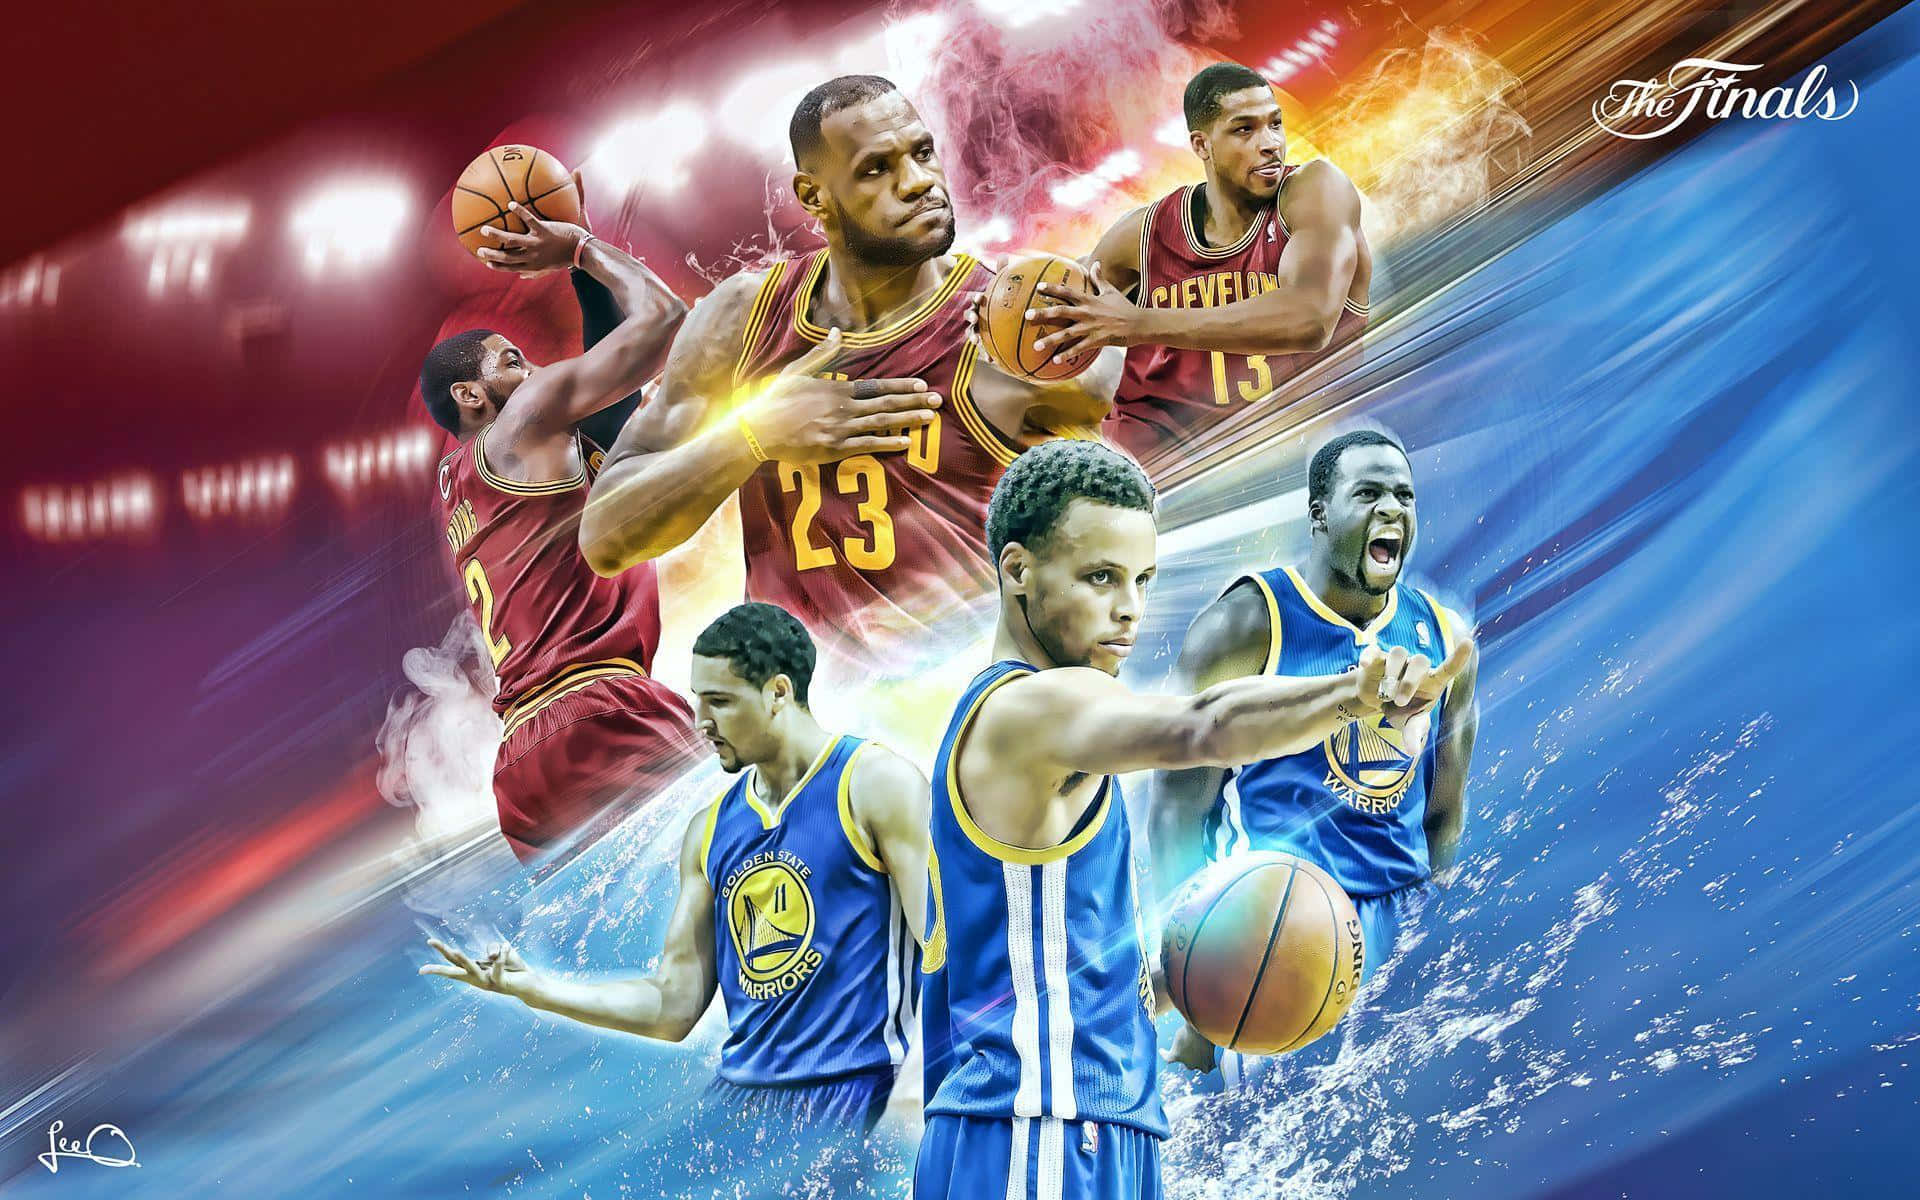 Experience The Best Of Nba With The New Wallpaper.